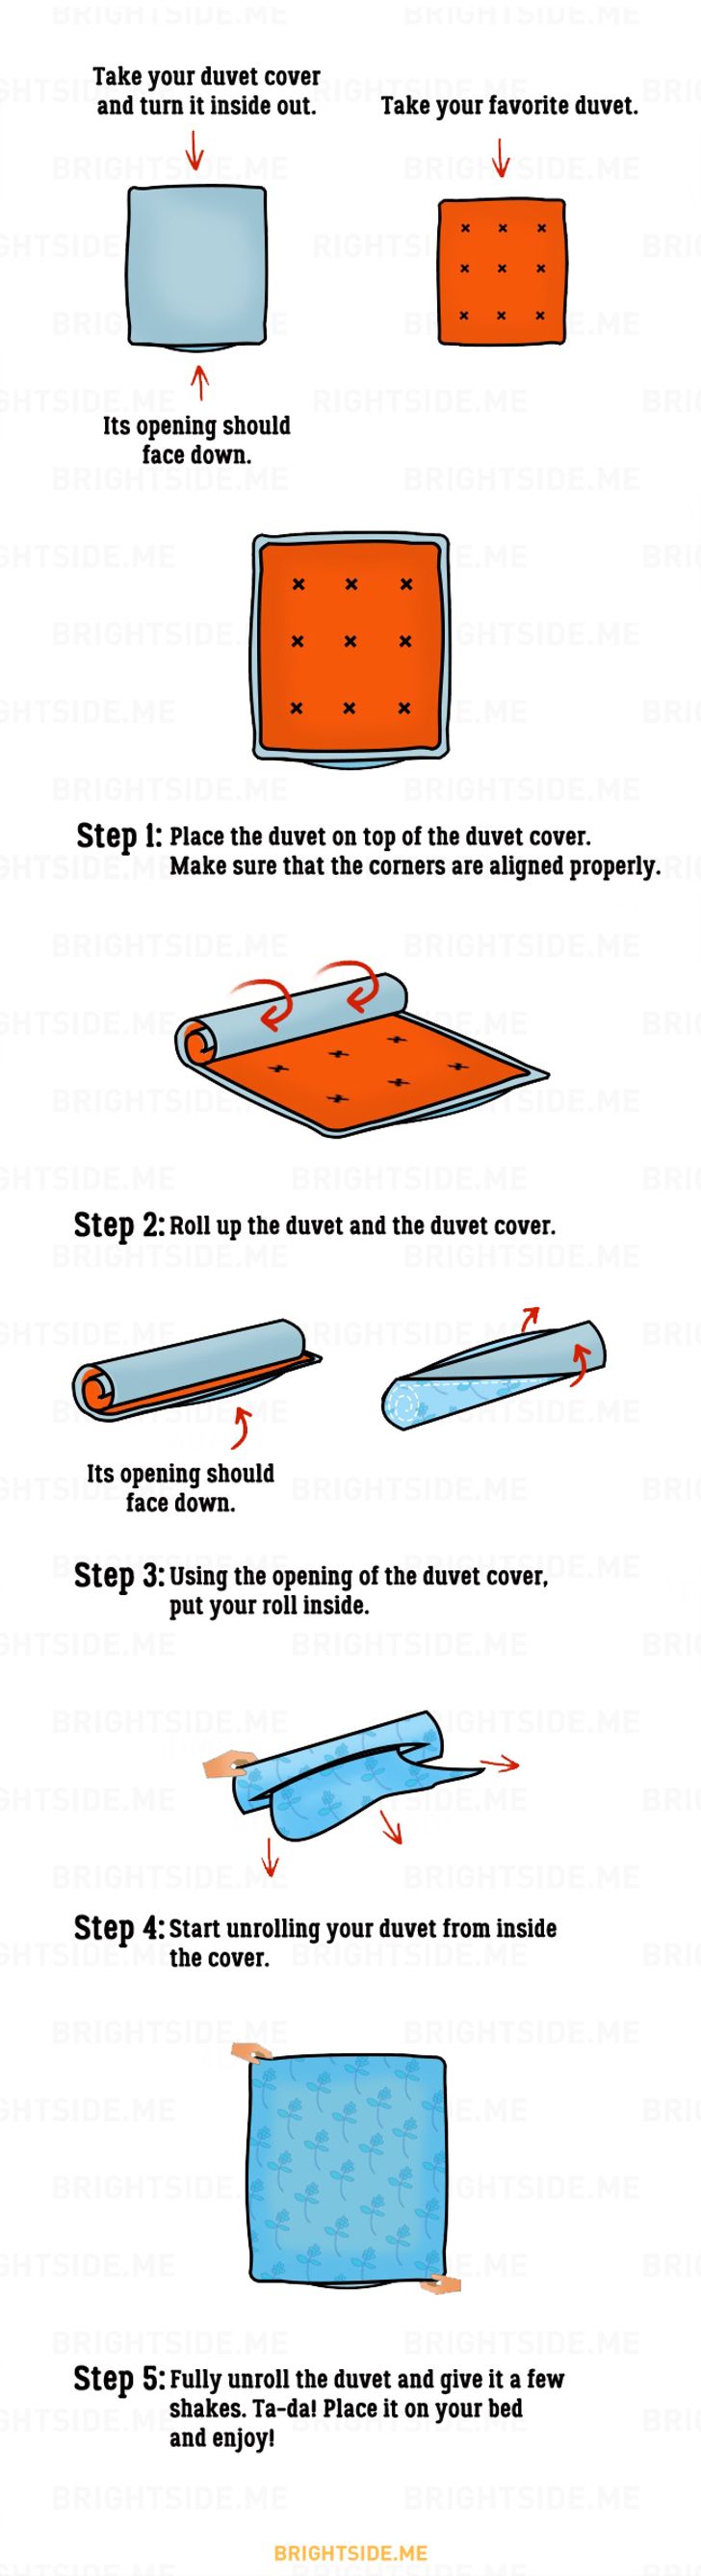 A Duvet Cover, Do You Have To Put An Insert In A Duvet Cover